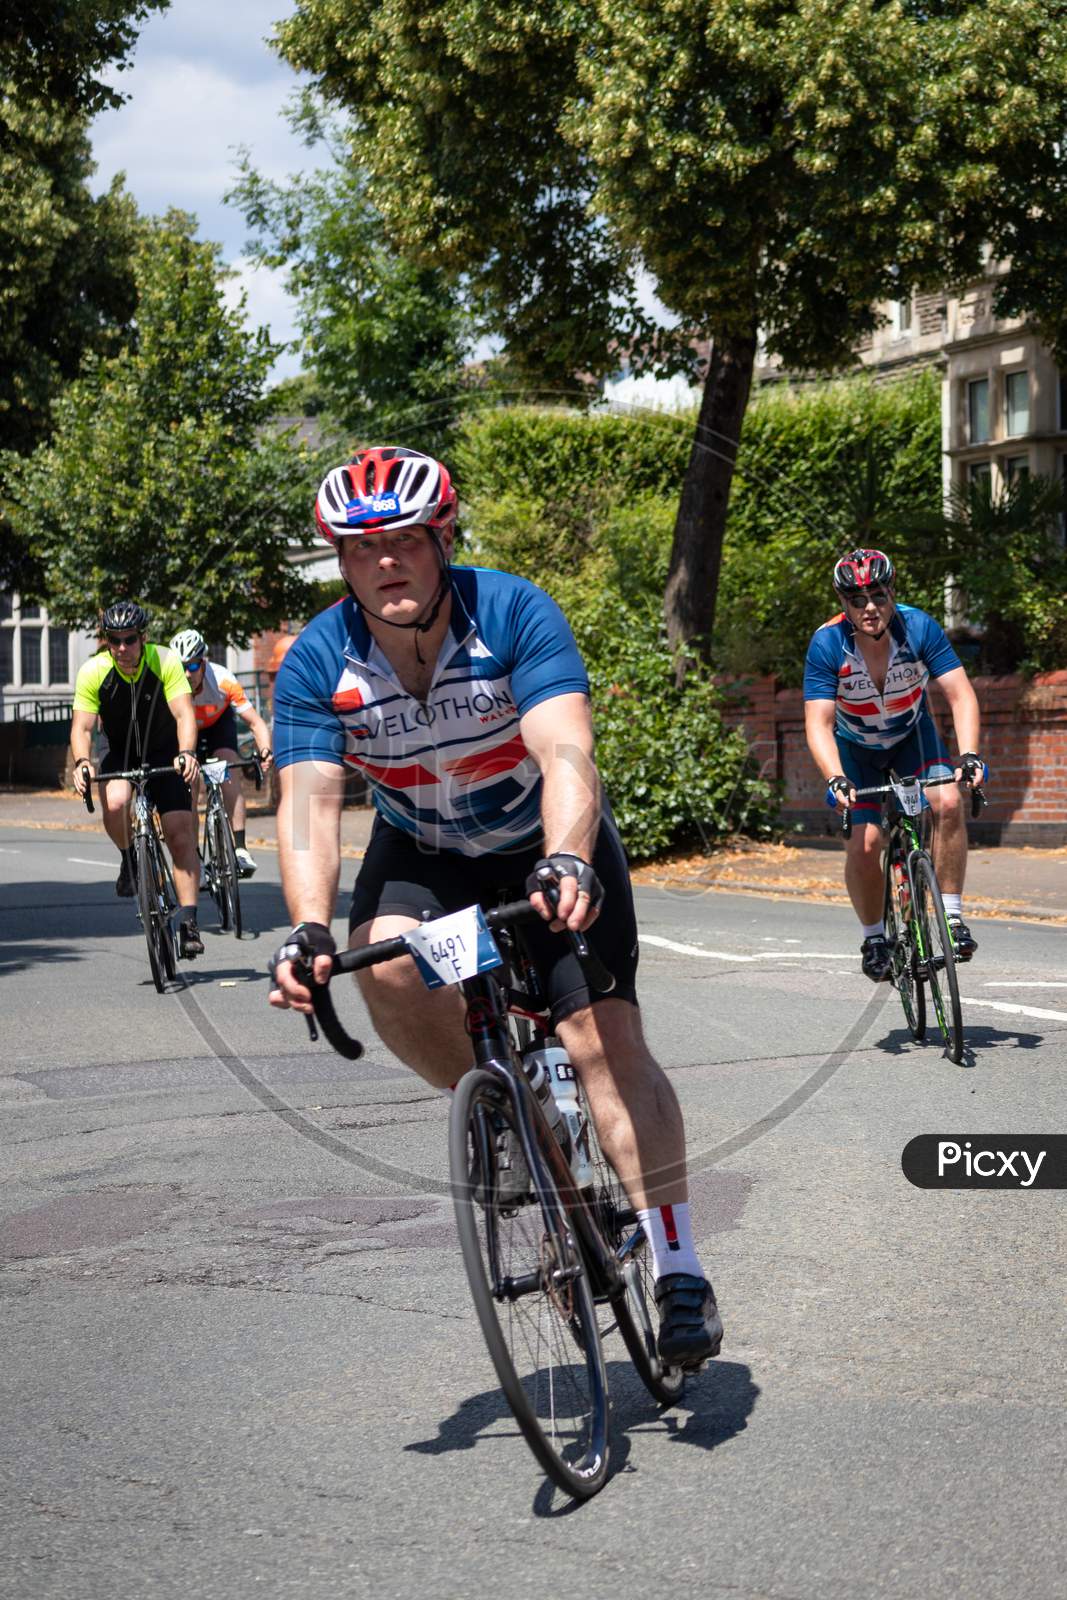 Cardiff, Wales/Uk - July 8 : Cyclists Participating In The Velothon Cycling Event In Cardiff Wales On July 8, 2018. Four Unidentified People